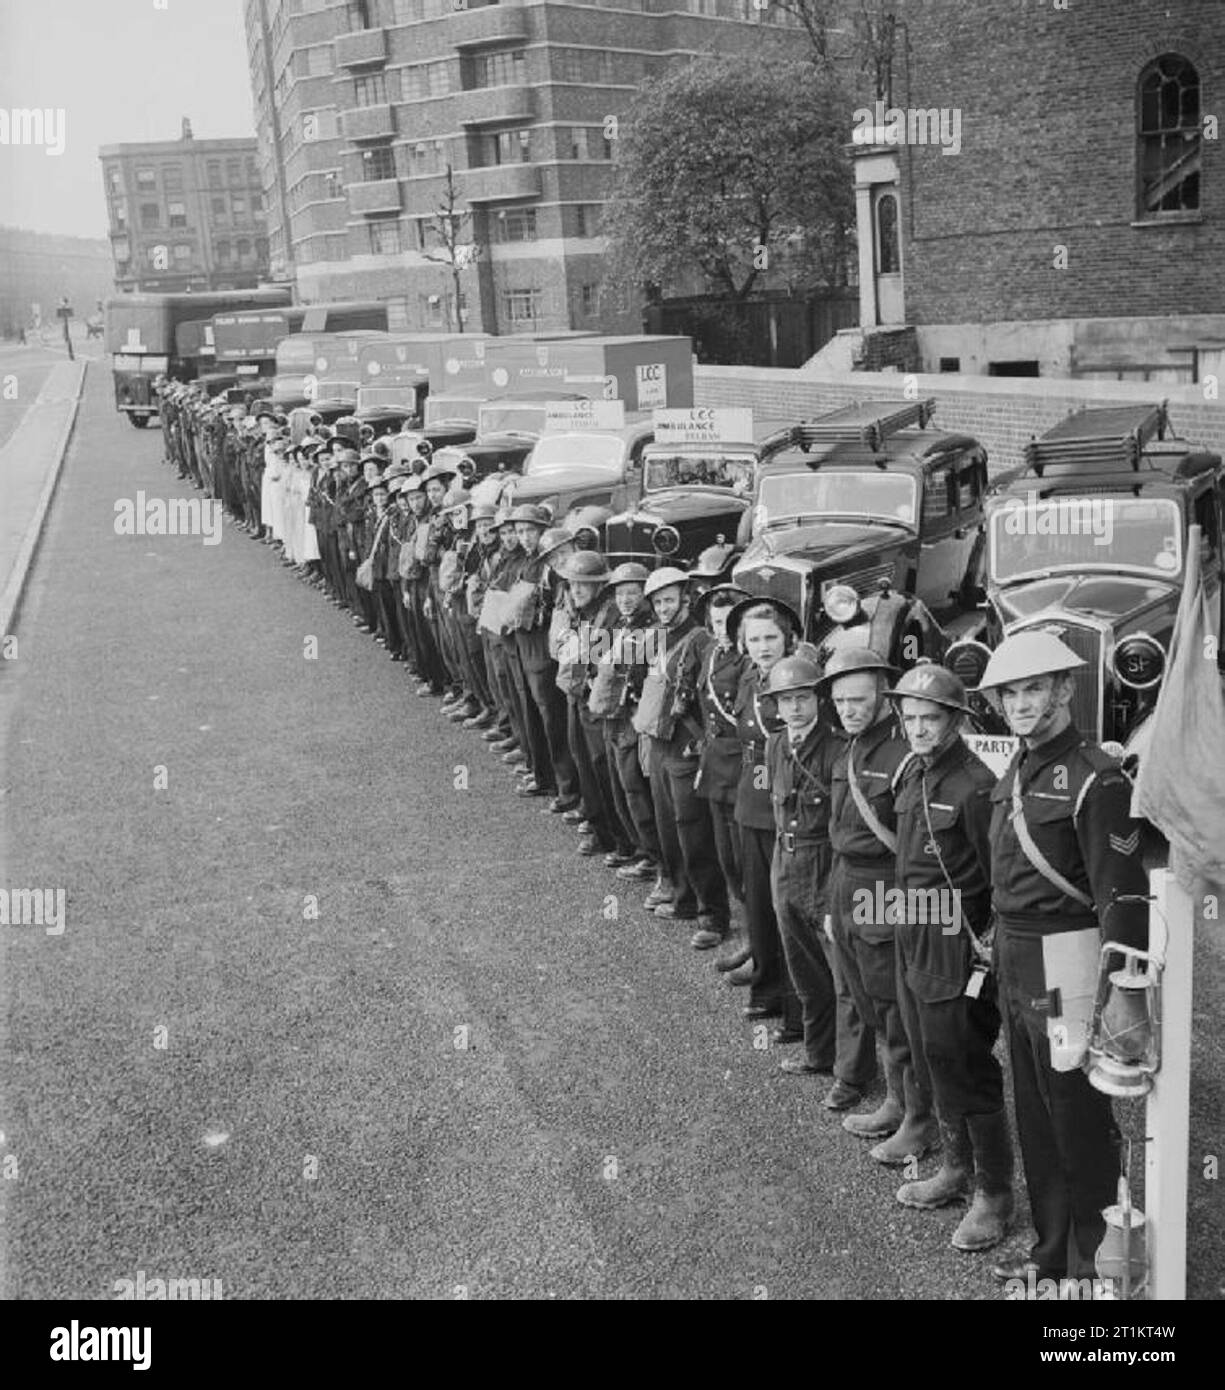 The Reconstruction of 'an Incident'- Civil Defence Training in Fulham, London, 1942 Members of various Civil Defence services, including ambulance workers, rescue and stretcher parties, Civil Defence wardens and nursing staff line up with their vehicles at the end of a large-scale Civil Defence training exercise in Fulham. Twelve vehicles and fifty personnel, not including the Fire Service, were involved in this exercise. The Incident Officer, wearing a blue helmet, stands next to his blue lamp and flag in the foreground. This photograph was taken on Conan Street, now West Cromwell Road, looki Stock Photo